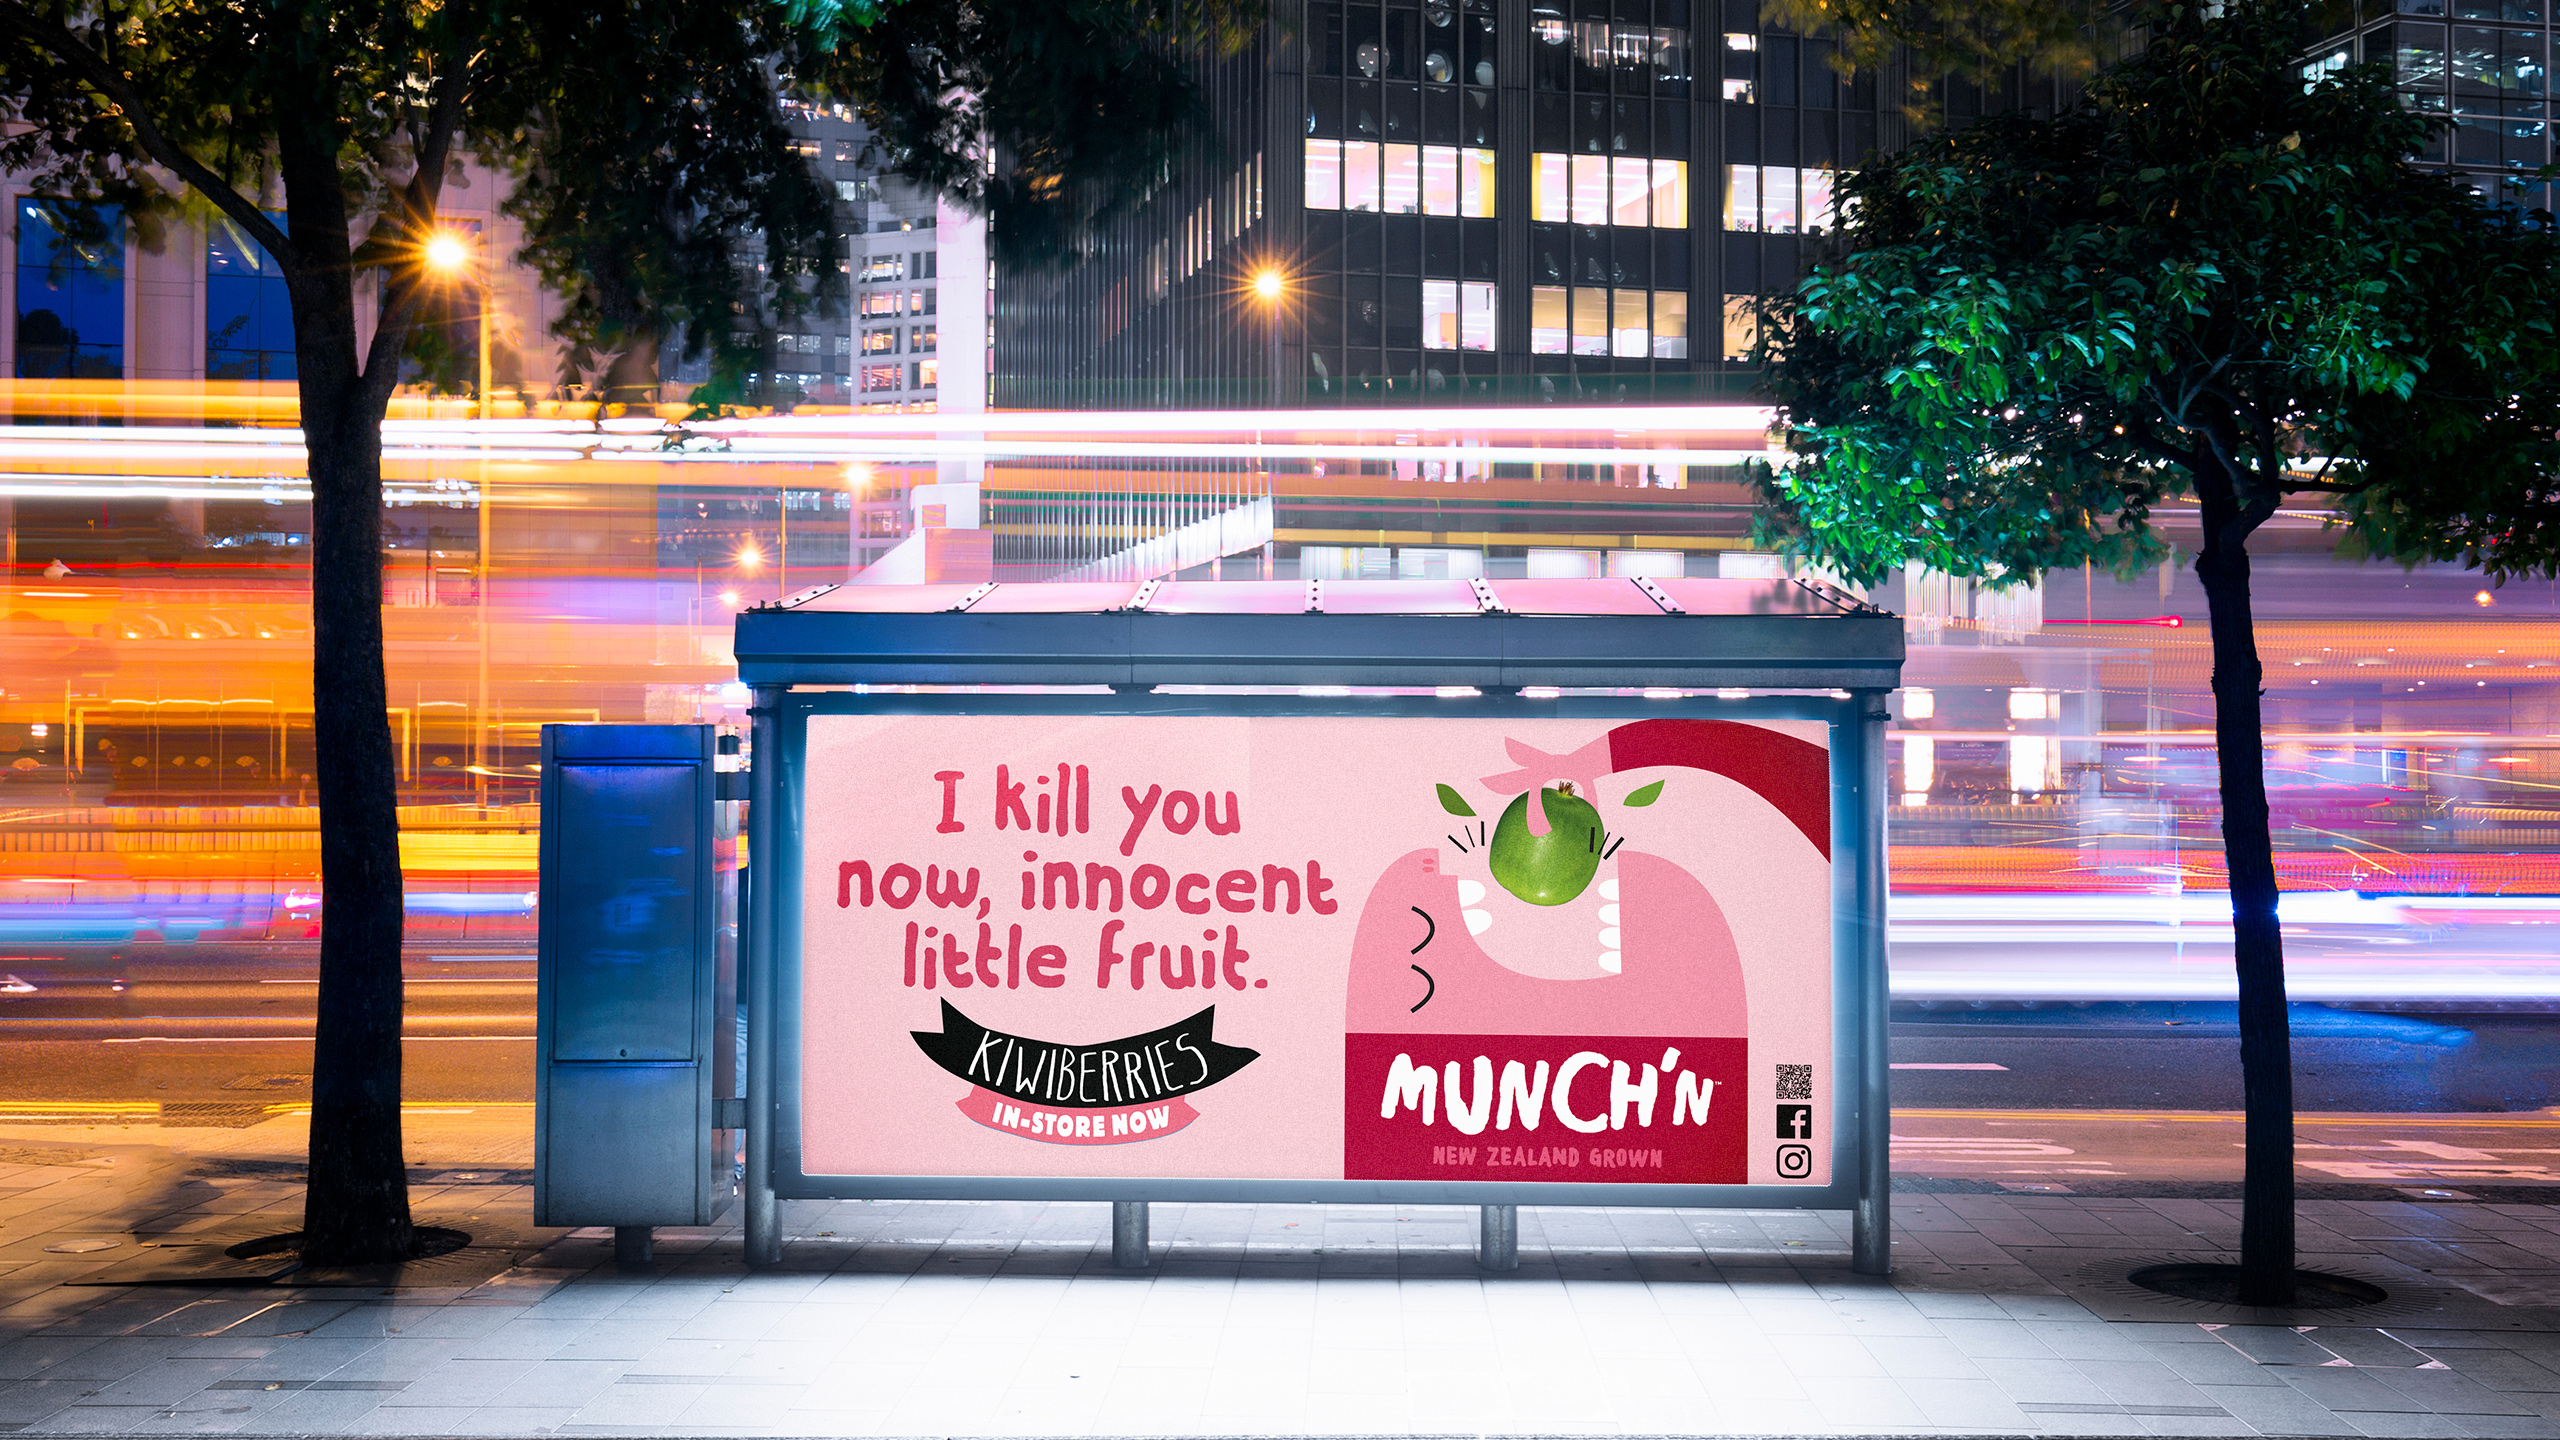 Tried-and-True-Design-Auckland-Munchn-Bus-Shelter-Poster